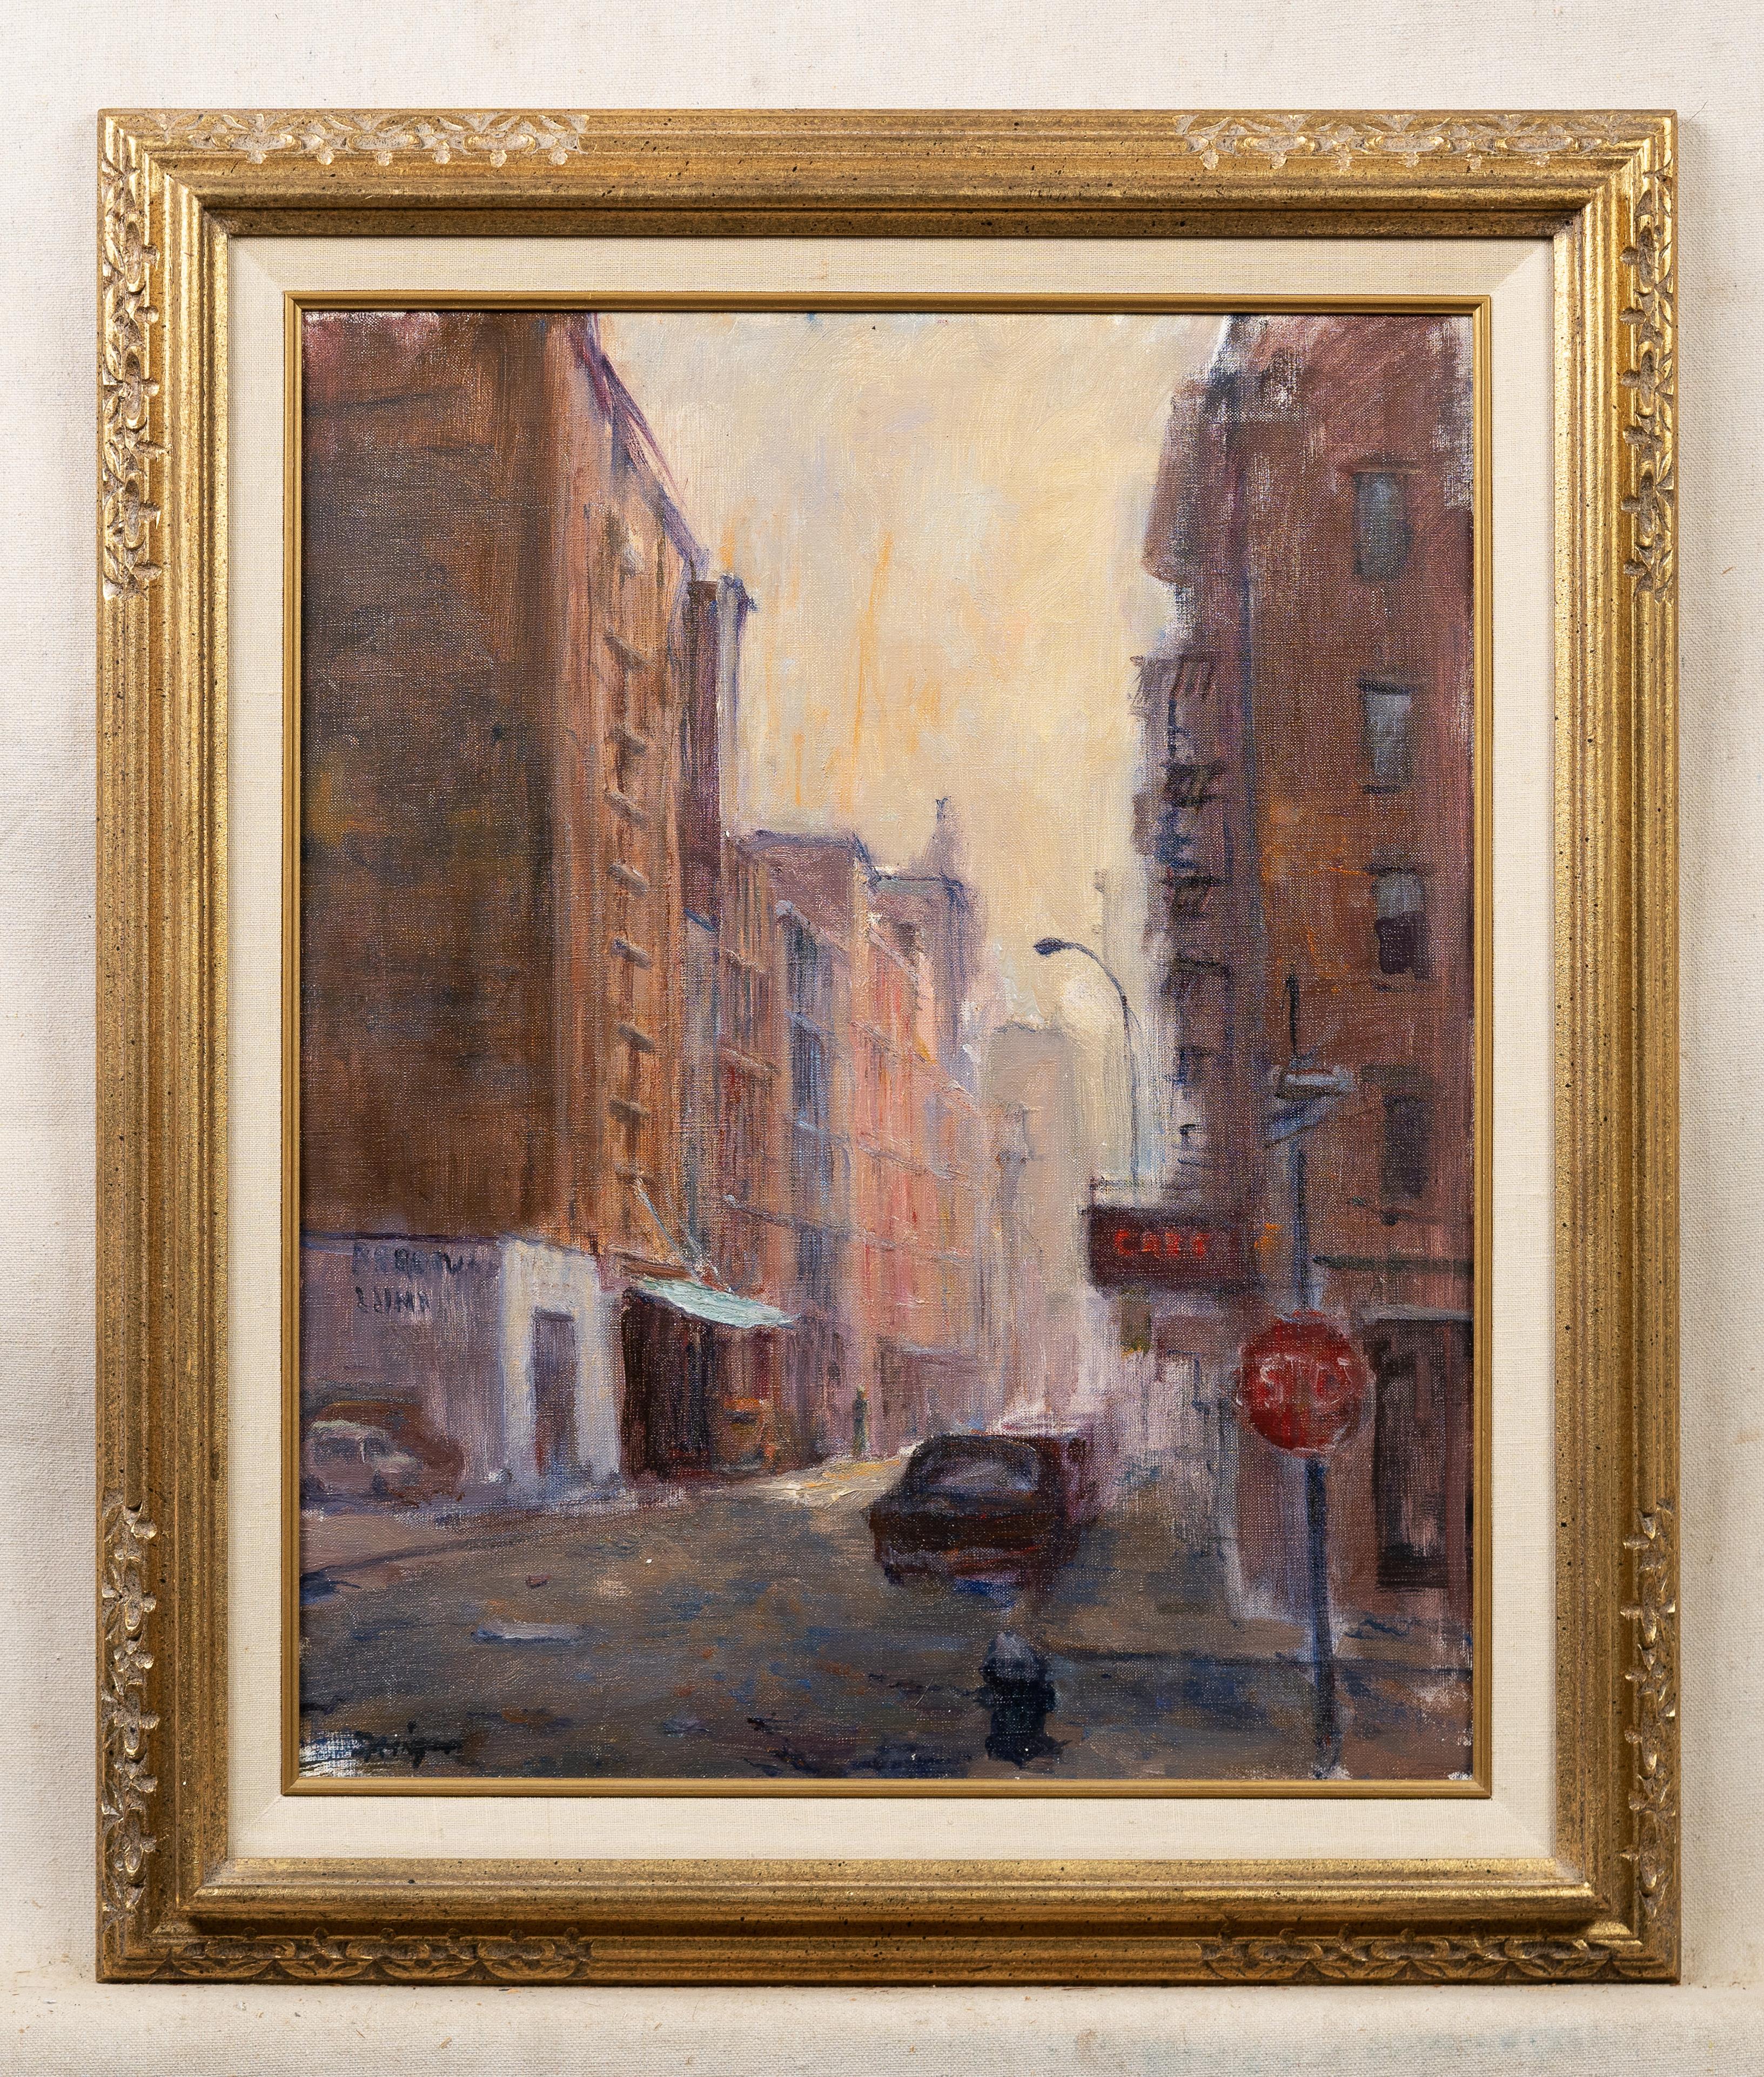 Antique American impressionist street scene oil painting by Anthony Springer (1928 - 1995).  Oil on canvas.  Framed.  Signed.  Image size size, 20H x 16L.